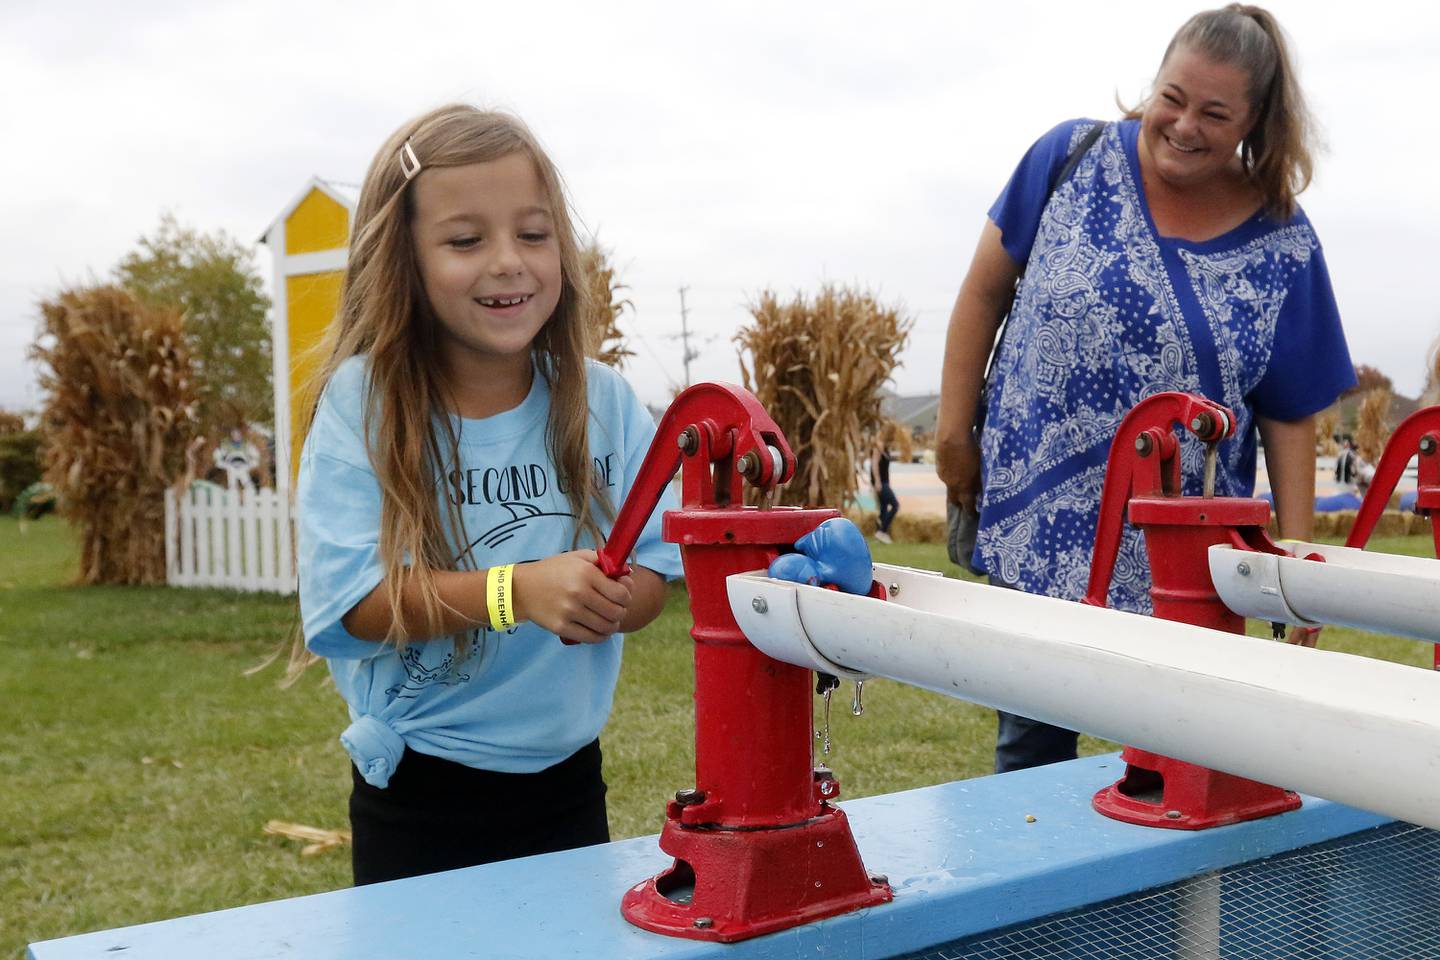 Kim Johnson, of Elgin, smiles as she watches daughter Francesca, 7, play in a duck race during the Fall on the Farm event at Tom's Market on Saturday, Oct. 2, 2021 in Huntley.  The month-long event began on Friday and will conclude Oct. 31.